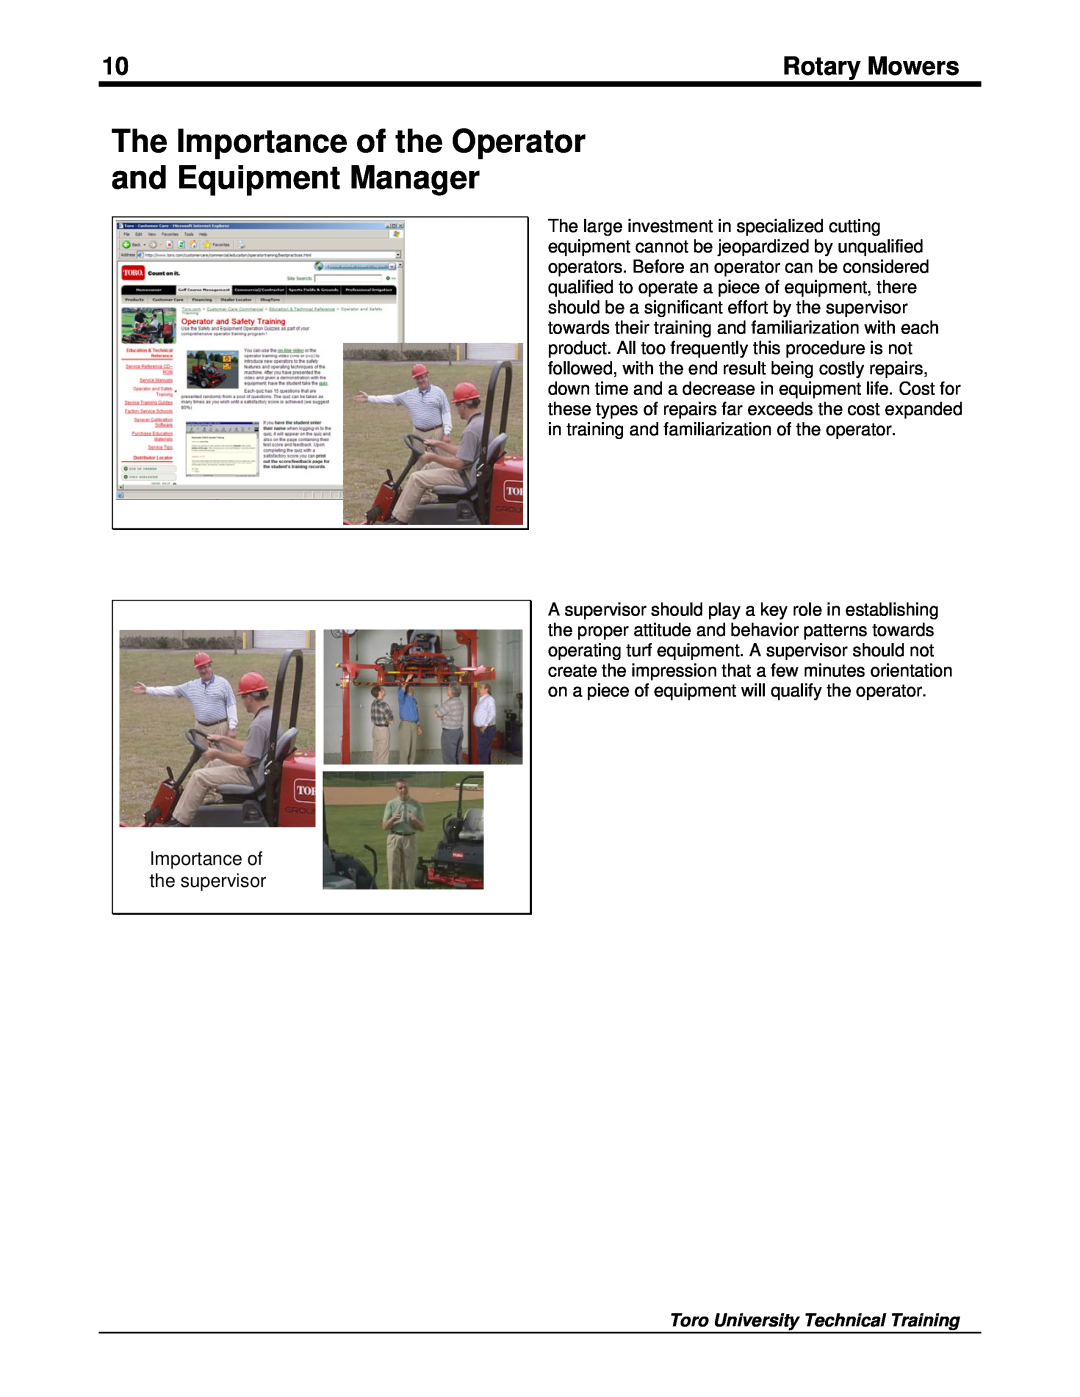 Toro 09167SL manual The Importance of the Operator, and Equipment Manager, Rotary Mowers, Importance of the supervisor 